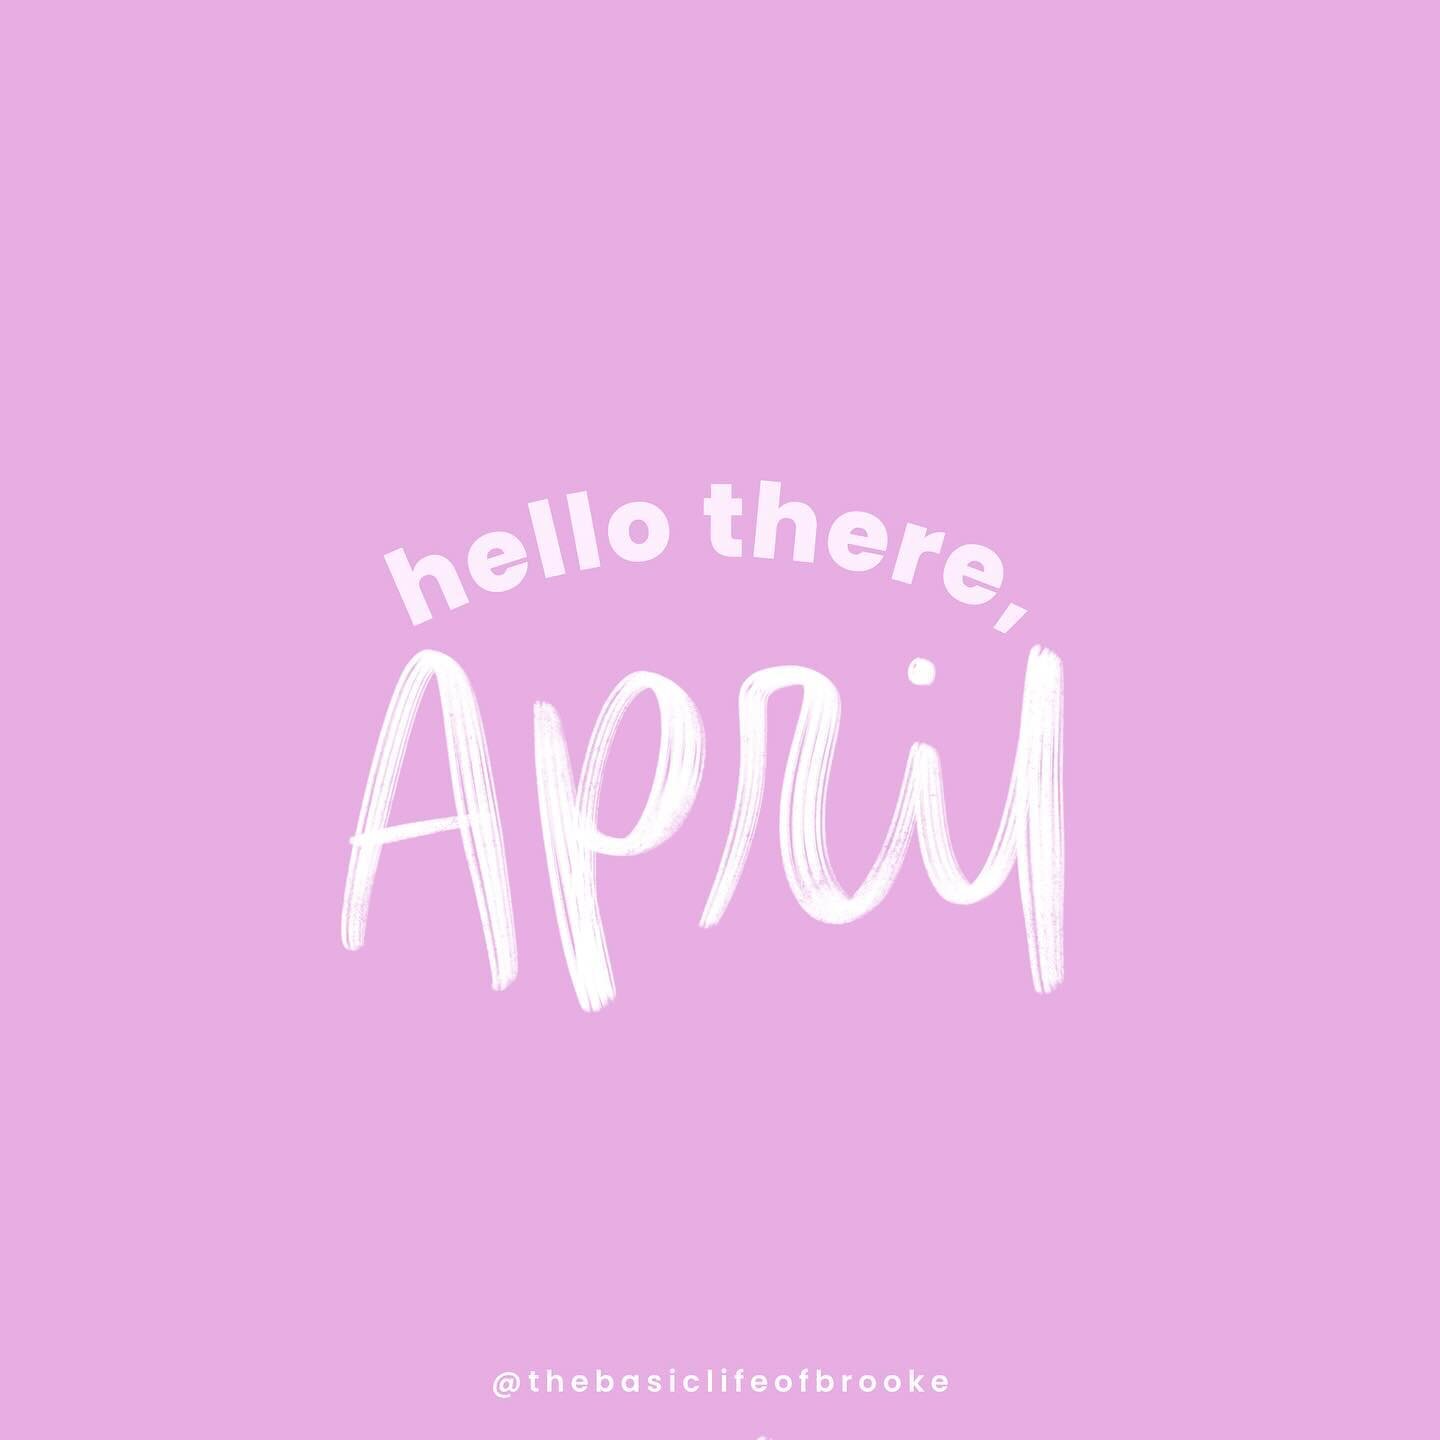 Here&rsquo;s to moving past the winter blues and into a bright, beautiful new month. 🌸